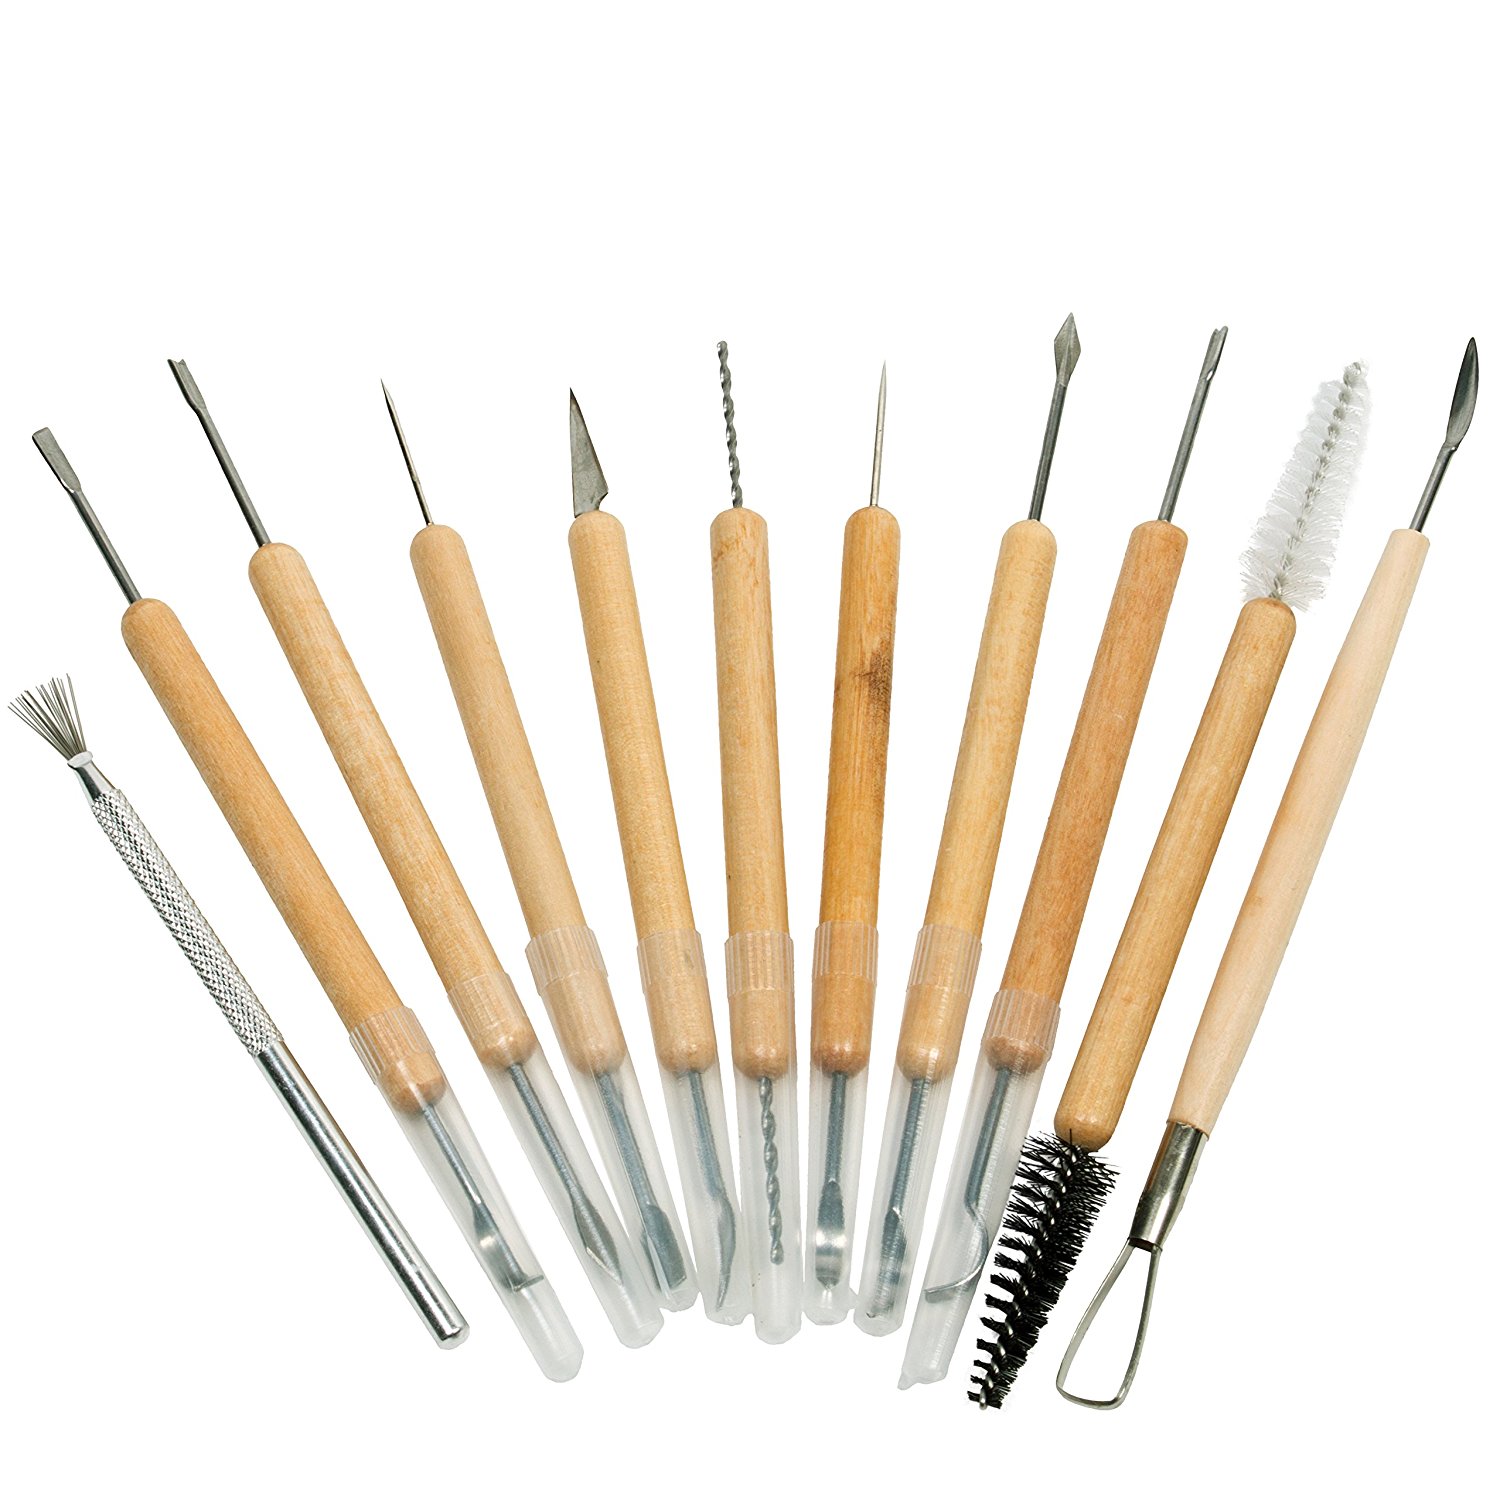 Amazon.com: Sculpting Tools- 11 Double-Sided Pieces with 21 Tools ...